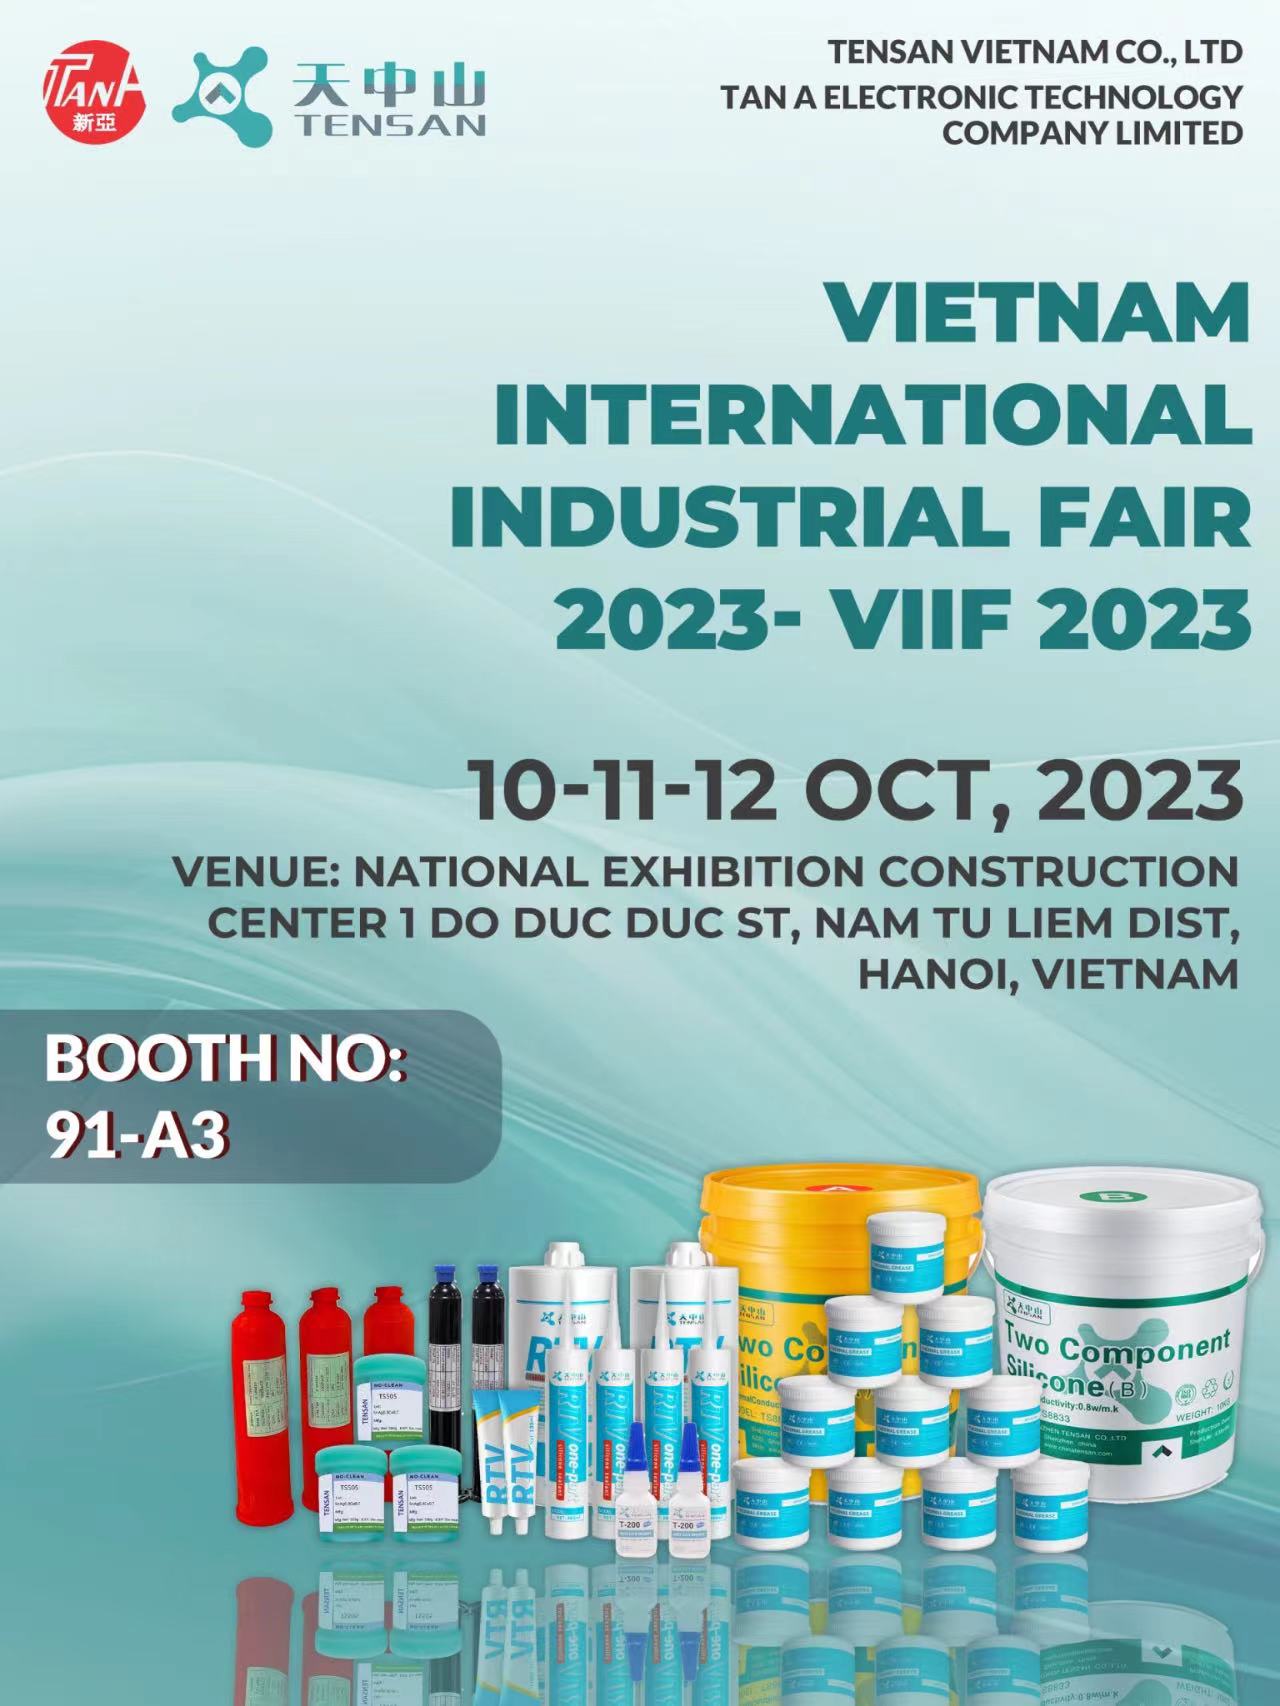 TENSAN participated in the 29th International Industrial Exhibition in Vietnam to showcase the charm of adhesives and hardware accessories